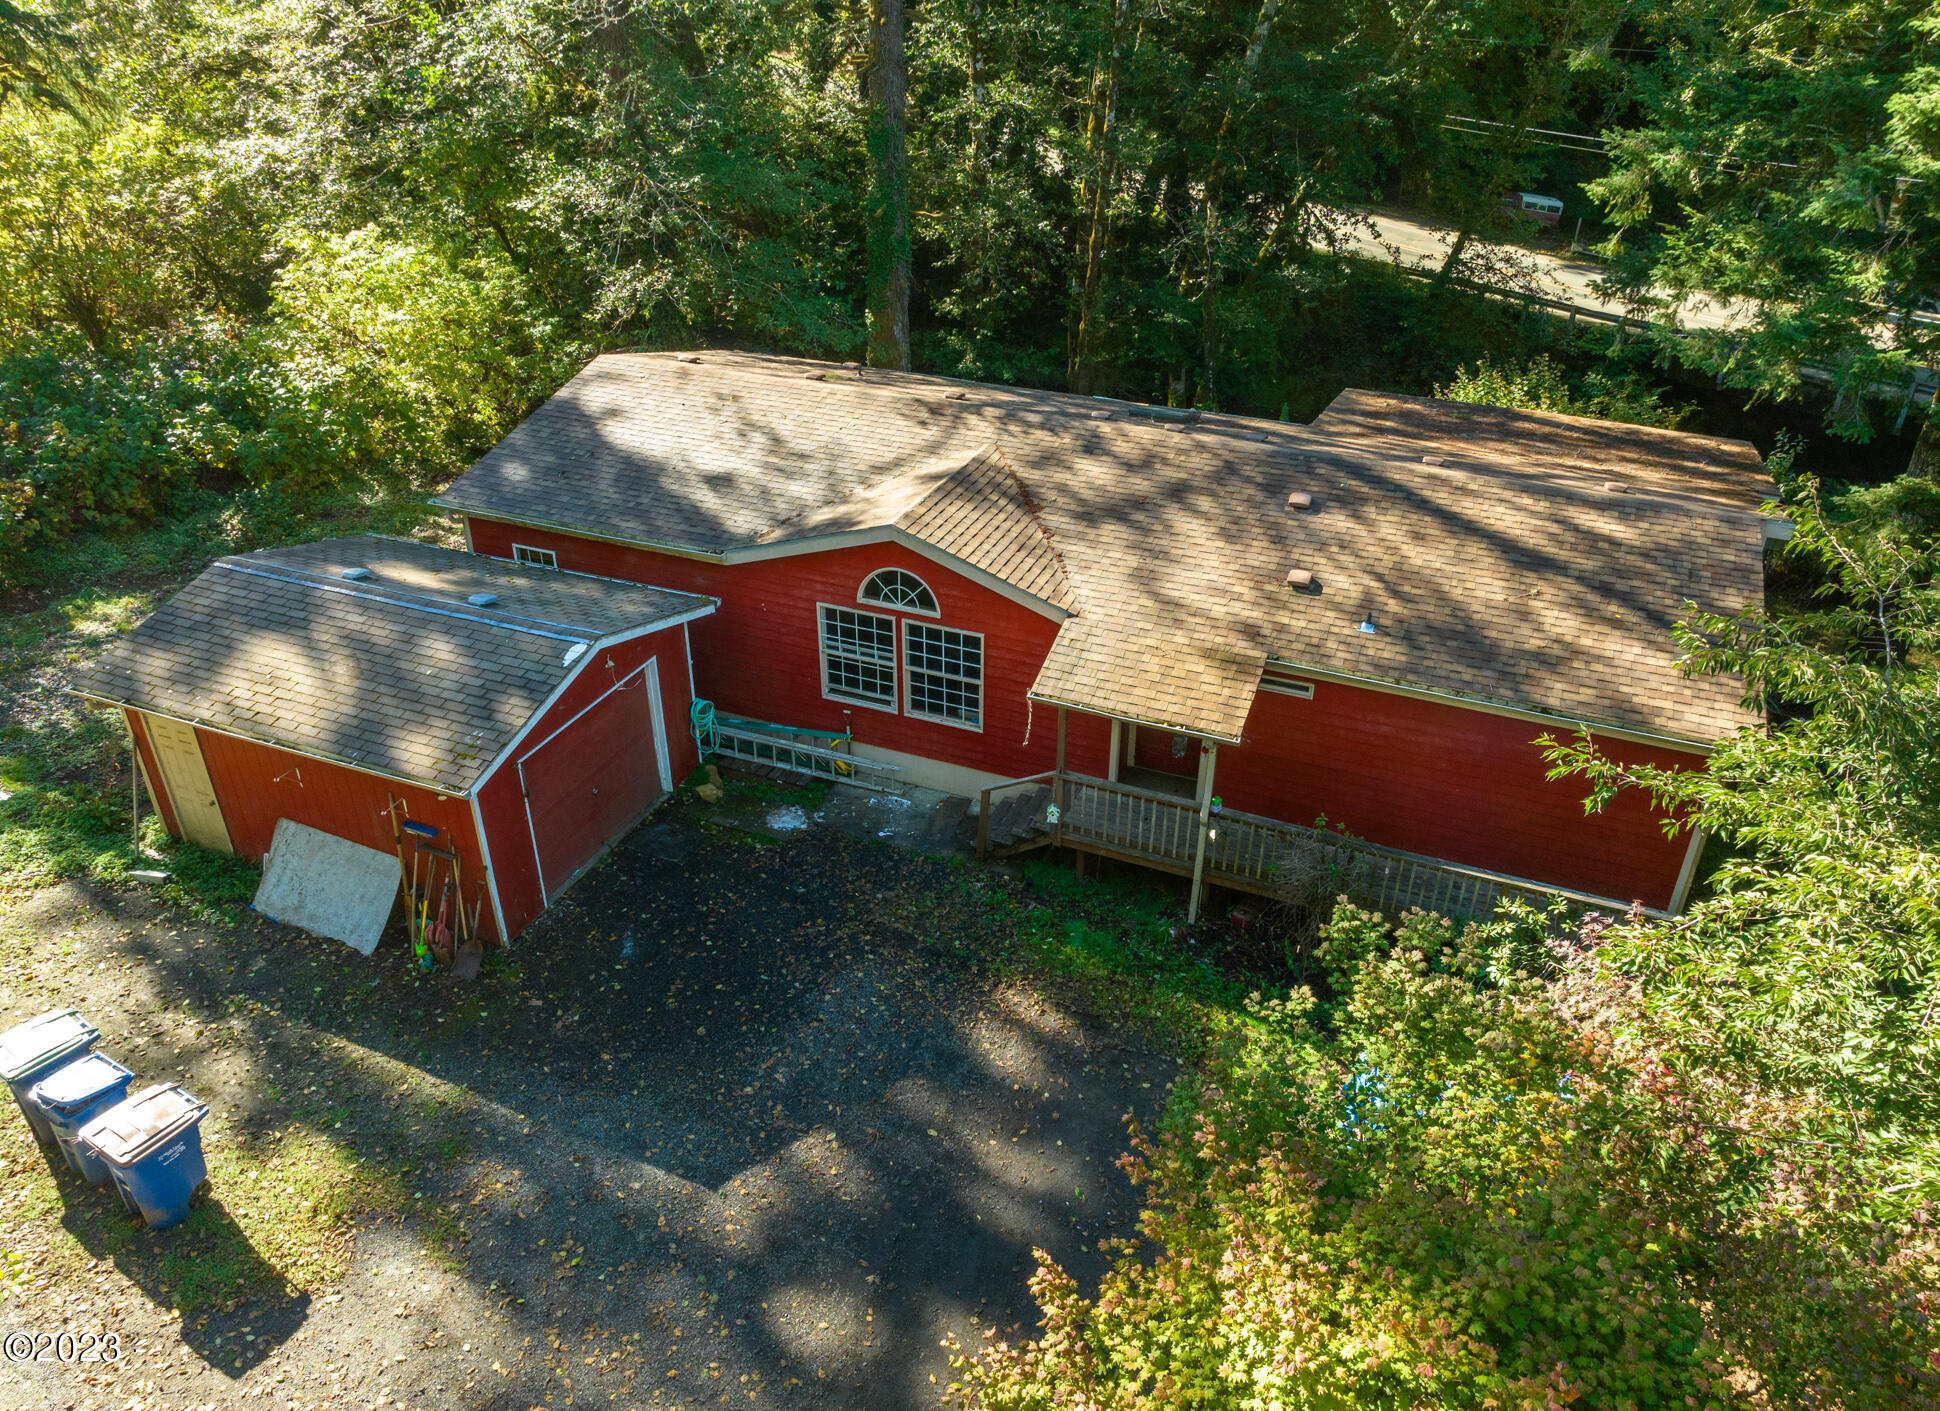 559 N Bear Creek Road Depoe Bay, Gleneden Beach, Lincoln City, Newport, Otis, Rose Lodge, Seal Rock, Waldport, Yachats, To Home Listings - Amy Plechaty, Emerald Coast Realty Real Estate, homes for sale, property for sale